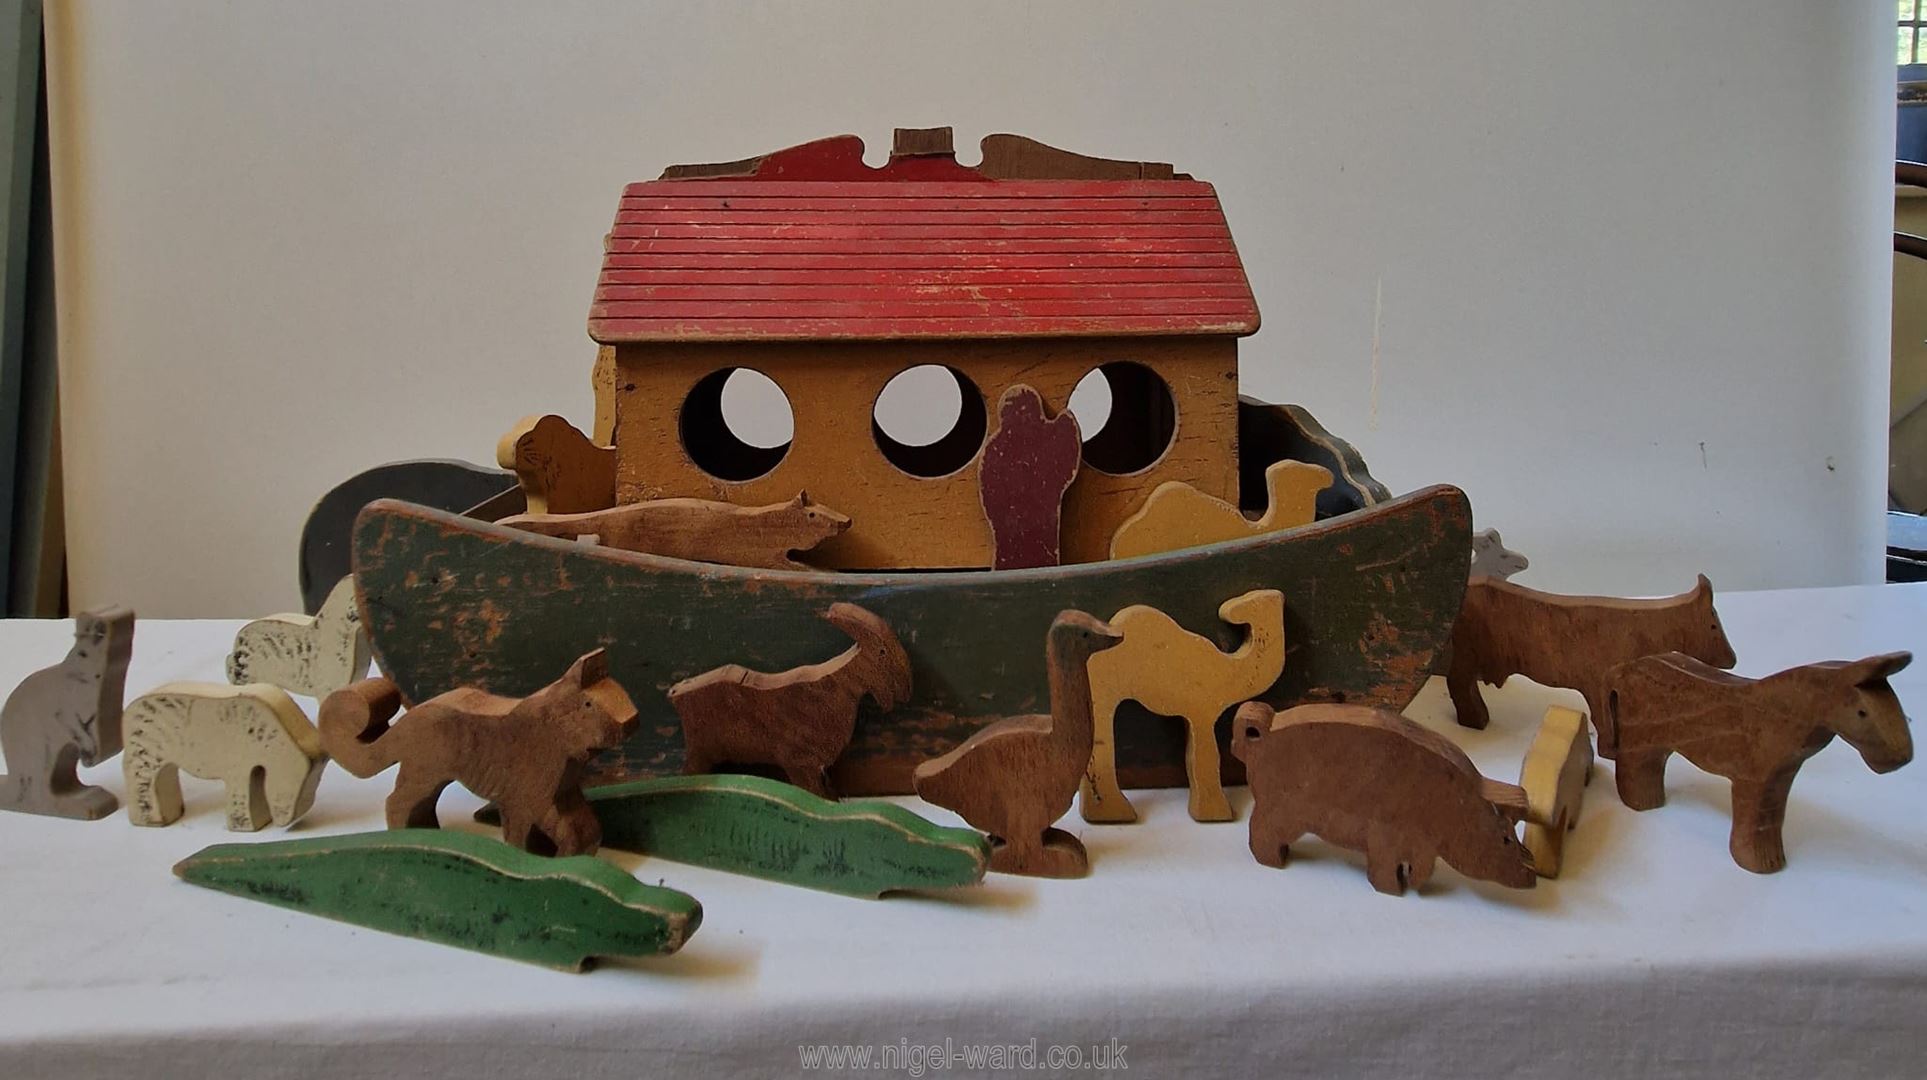 Tiger Toys of Petersfield: An early vintage wooden toy Noah’s Ark with 24 animals; - Image 4 of 6